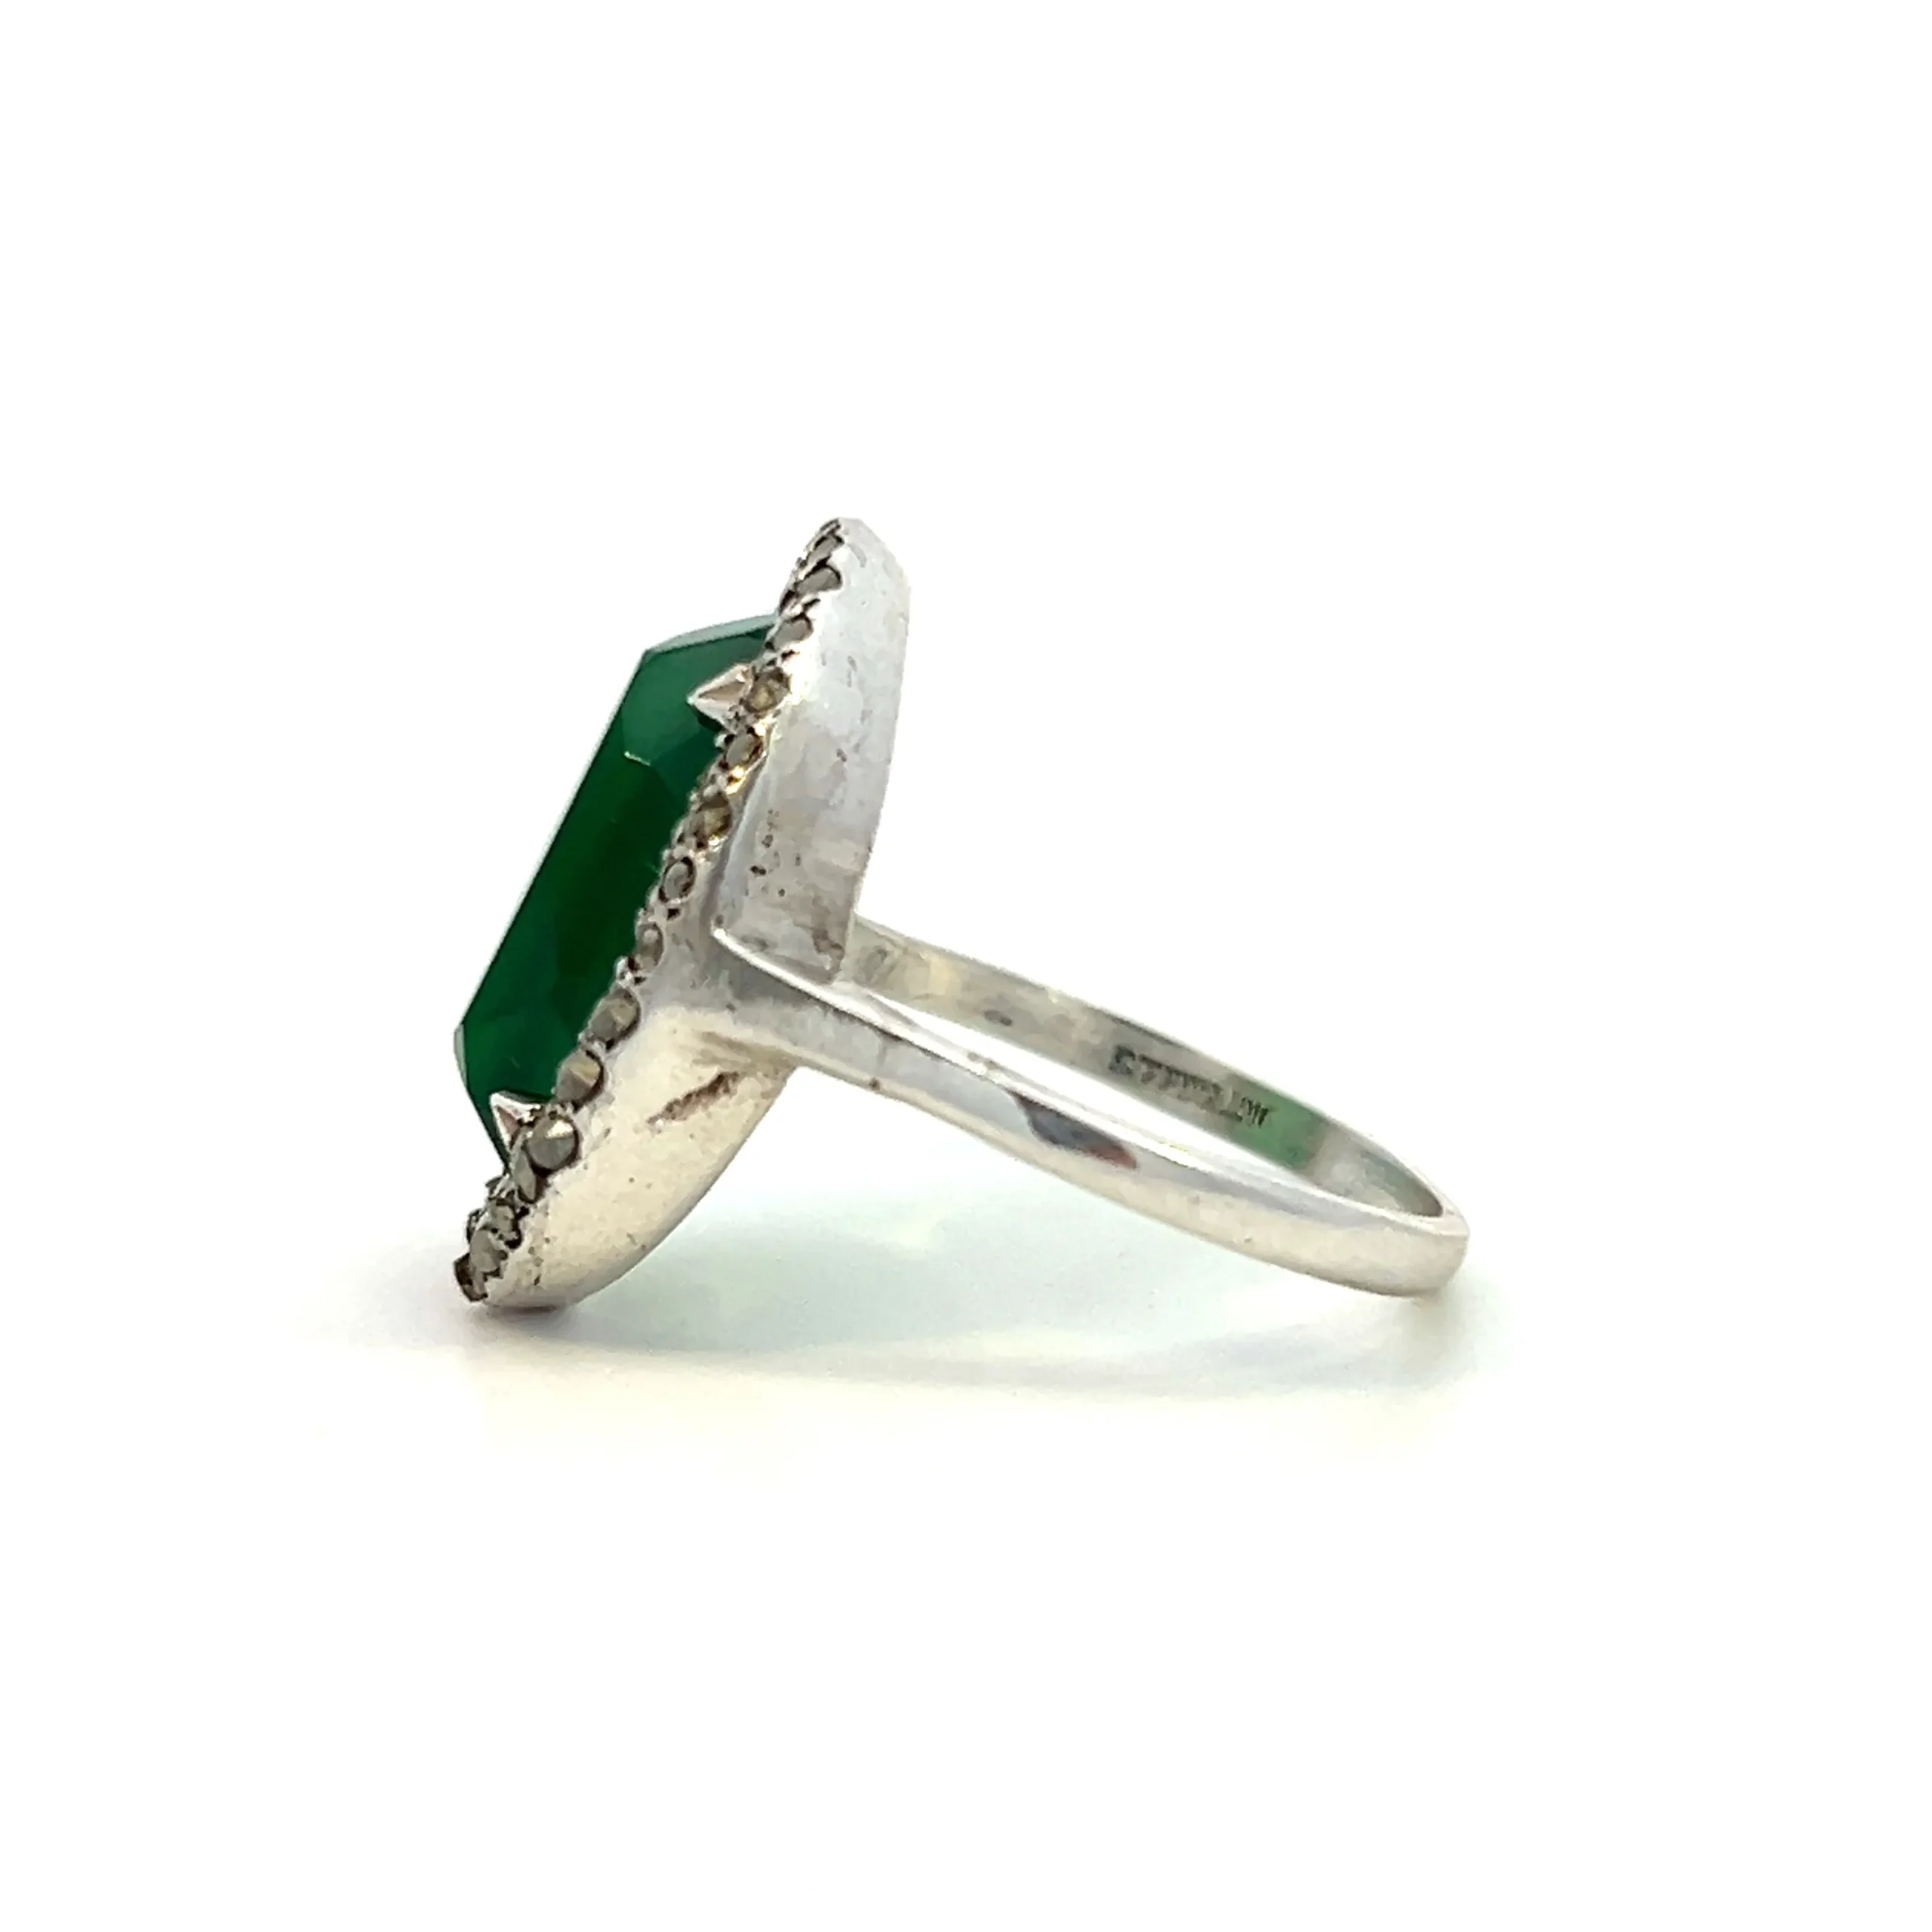 One estate sterling silver ring with an oval cabochon chrysoprase surrounded by a double halo of round-faceted marcasite in pave settings.